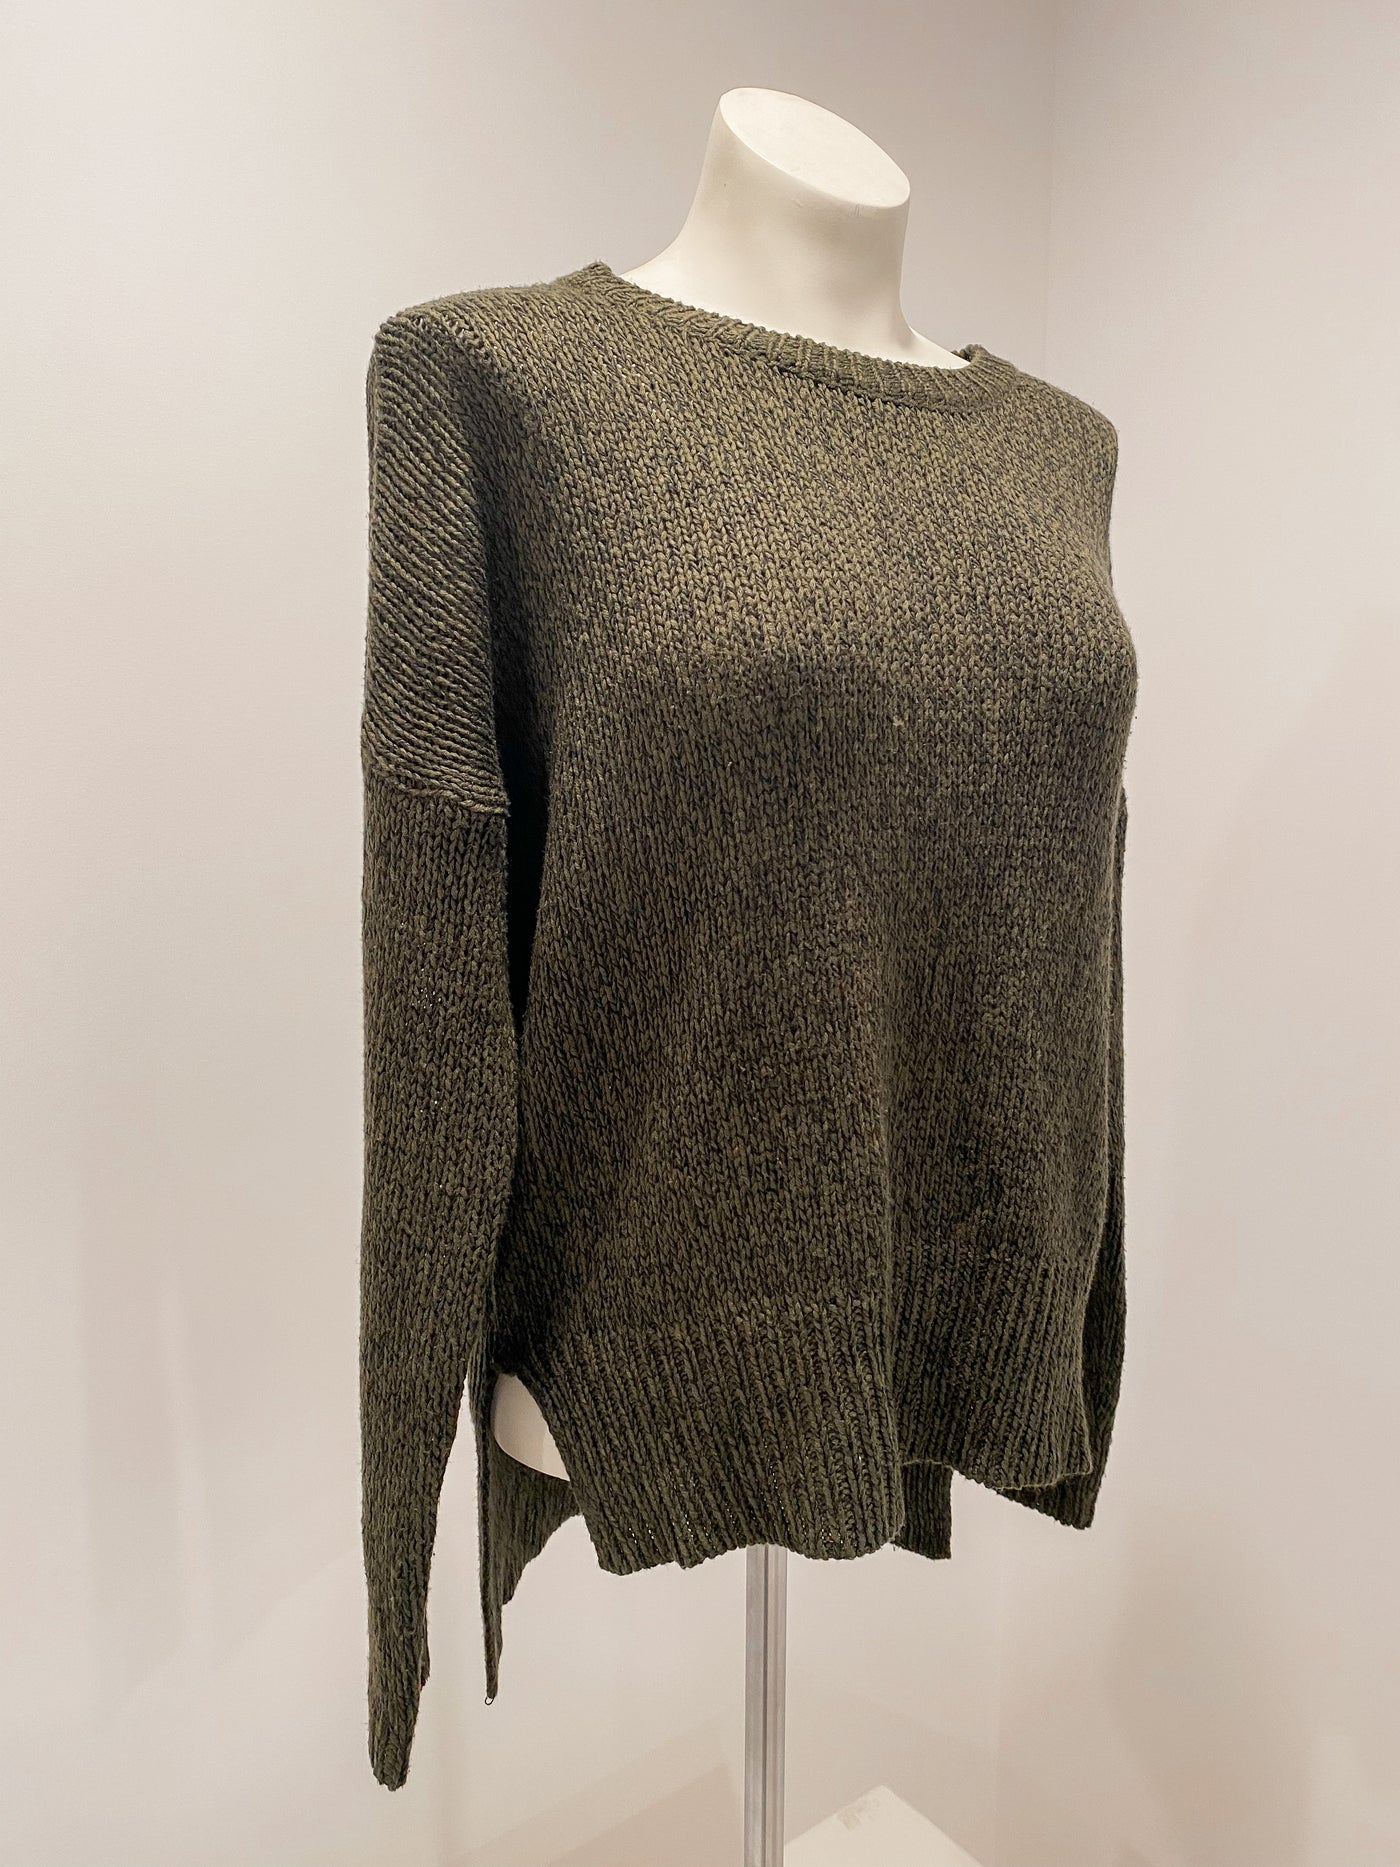 Olive Pullover Sweater